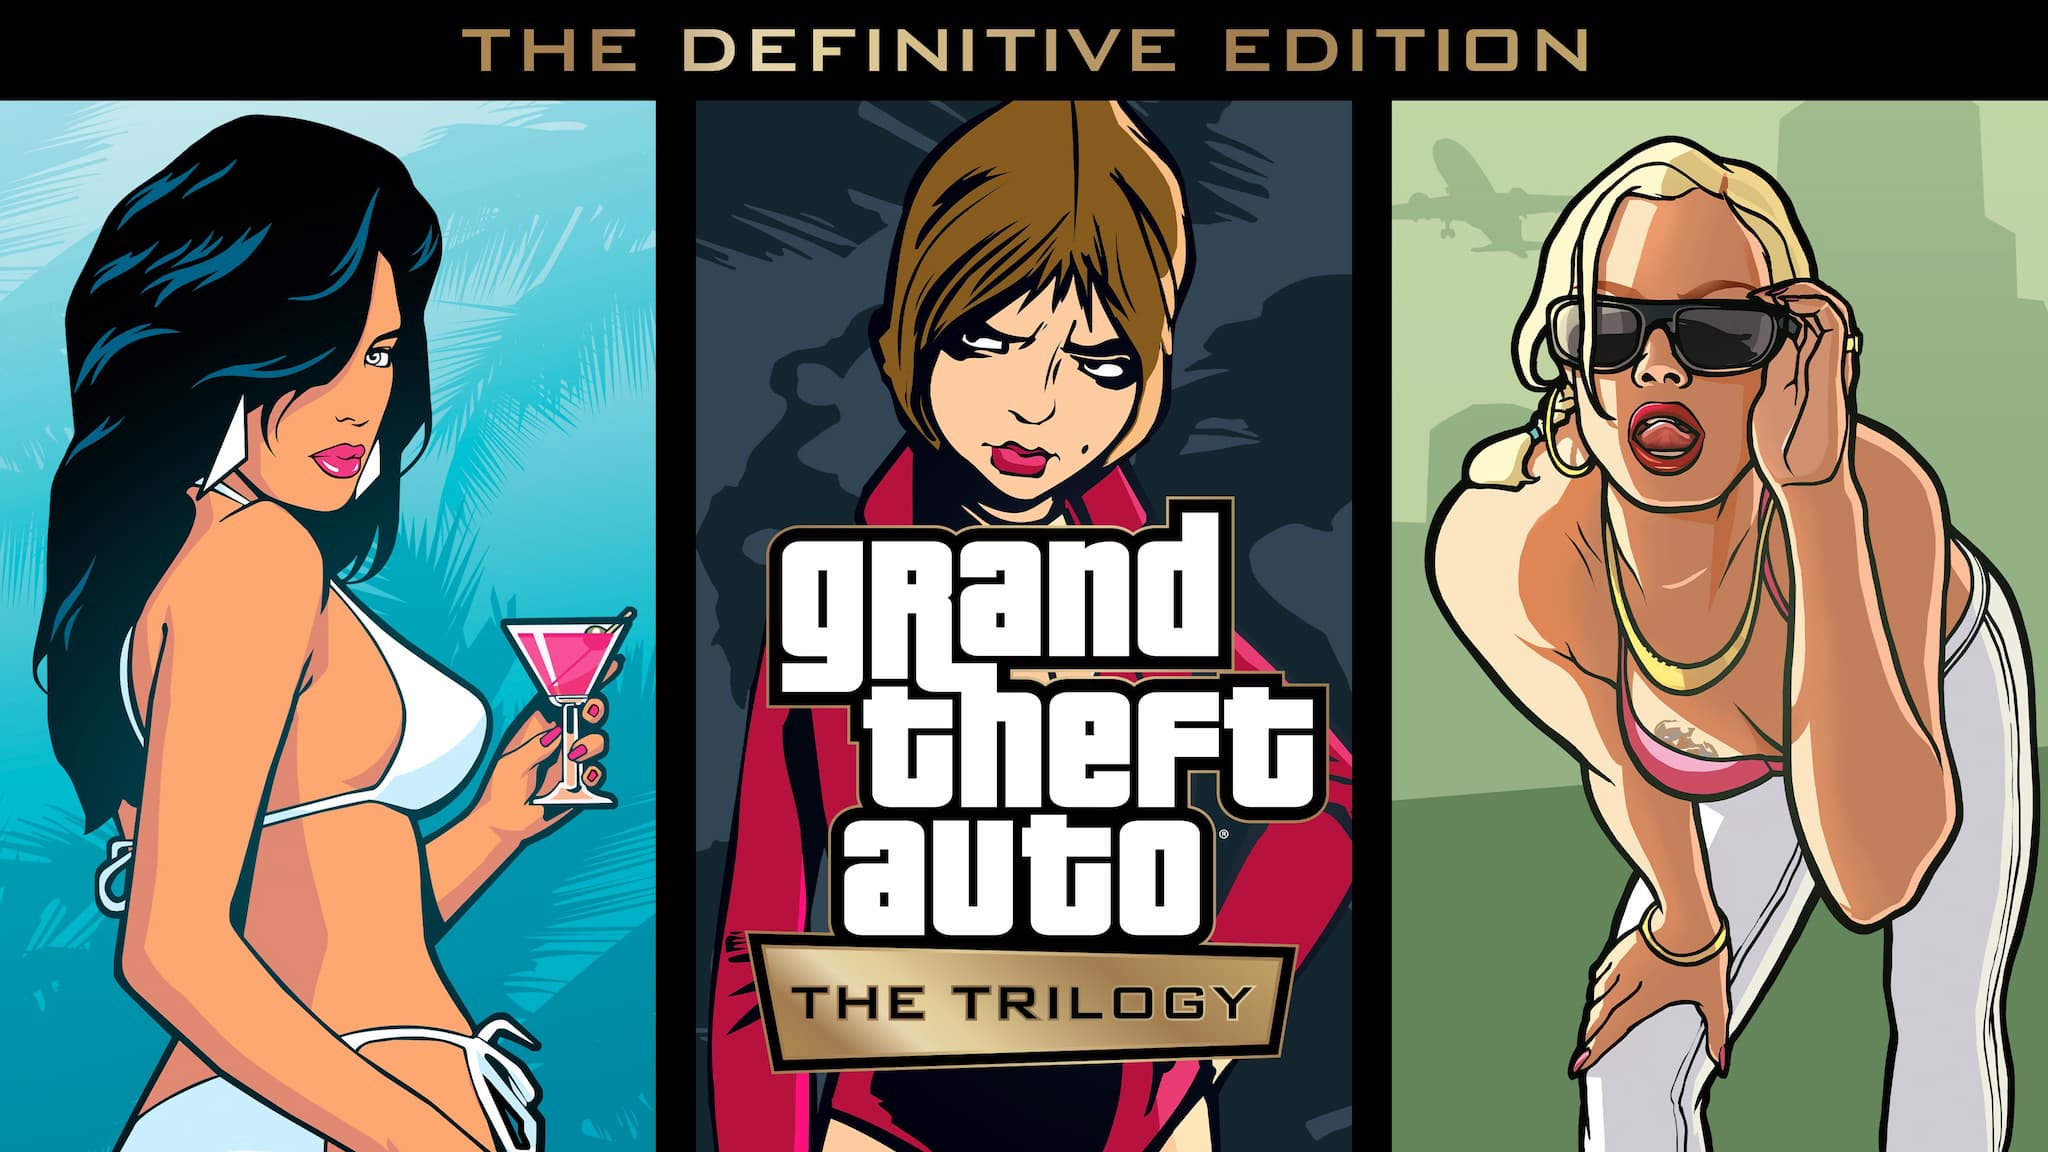 Download GTA III, Vice City, and San Andreas from Netflix for Android, iOS, and PC